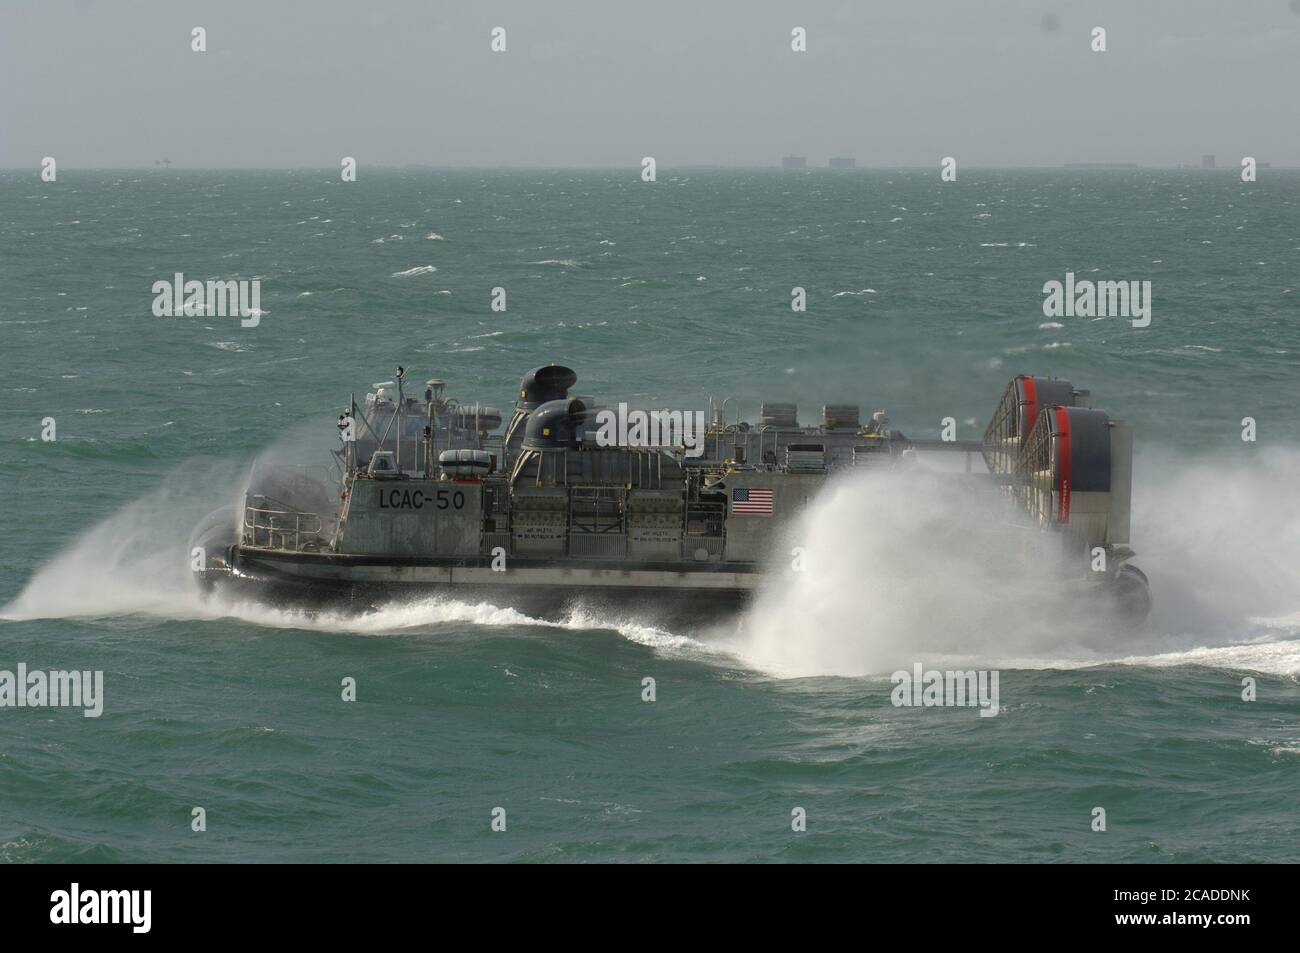 Port Aransas, TX January 15, 2006: During the maiden voyage of the USS San Antonio (LPD-17) amphibious transport dock after her commissioning ceremony, a Landing Craft Air Cushion (LCAC) capable of carrying 100 troops into battle, is demonstrated in the Gulf of Mexico. ©Bob Daemmrich Stock Photo